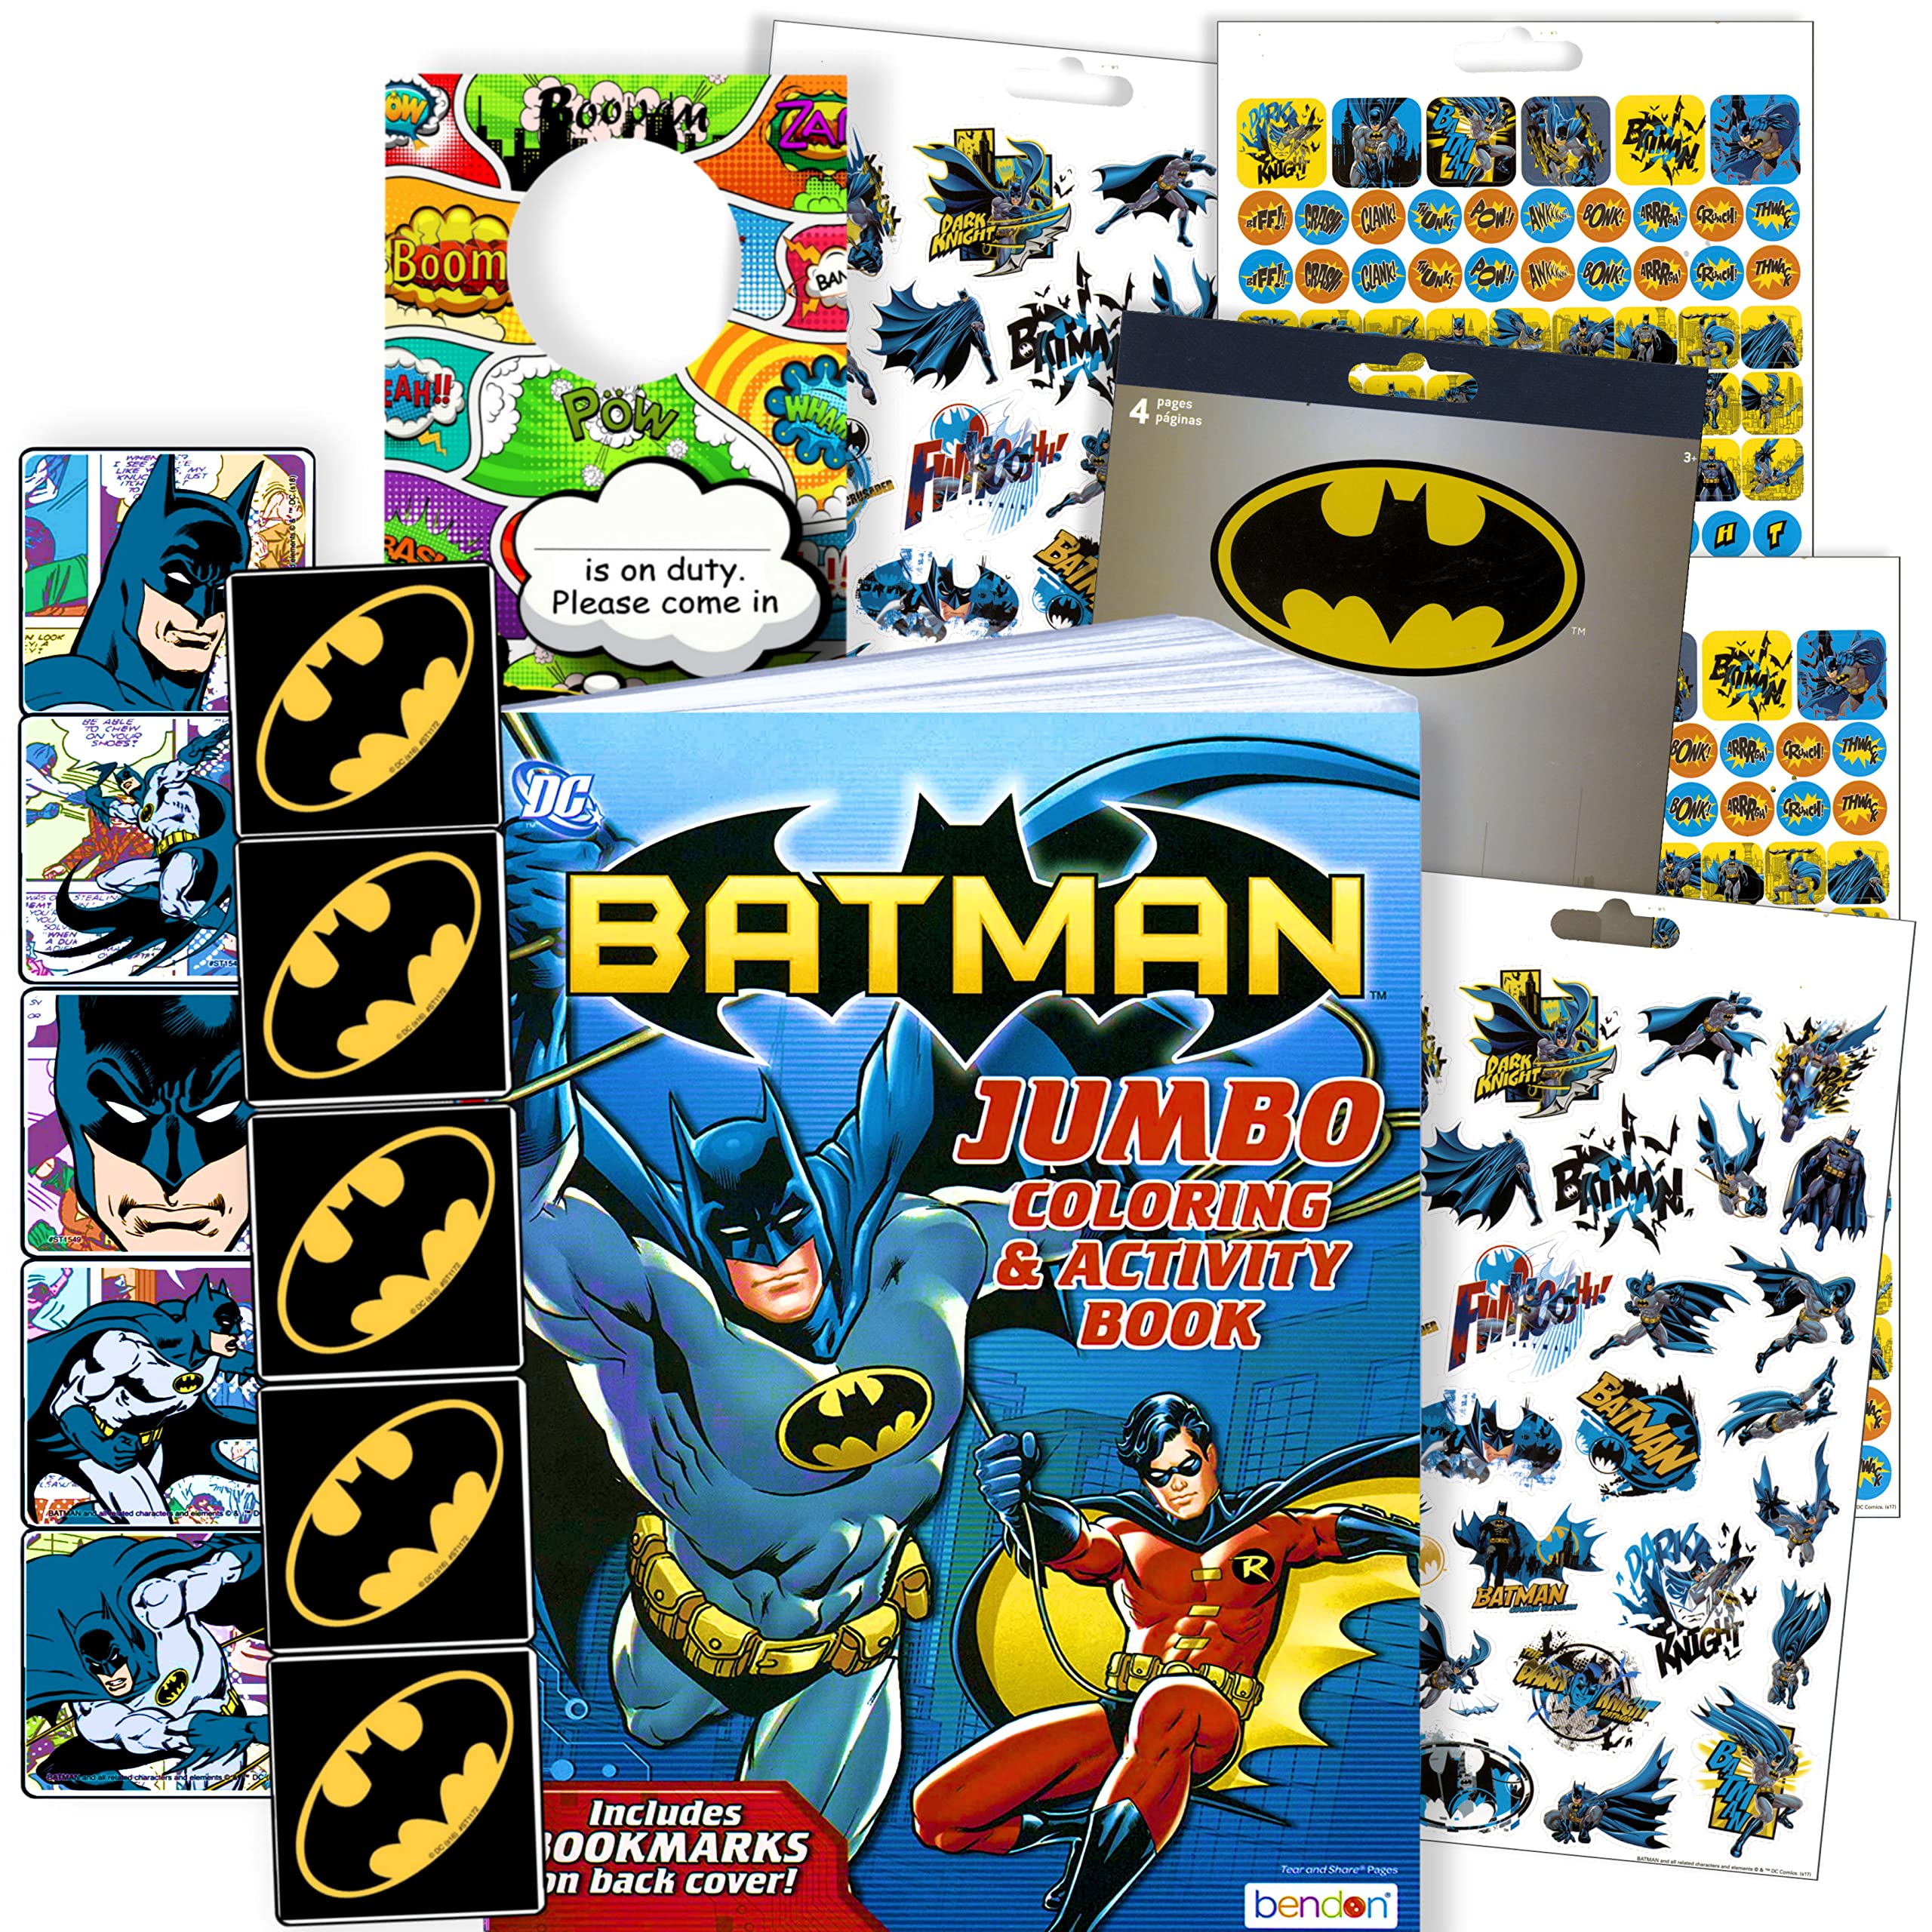 Disney Batman Stickers Activity Set - Bundle Includes Batman Sticker Pad, Batman Reward Stickers, Batman Coloring Book, and 2-sided Sup